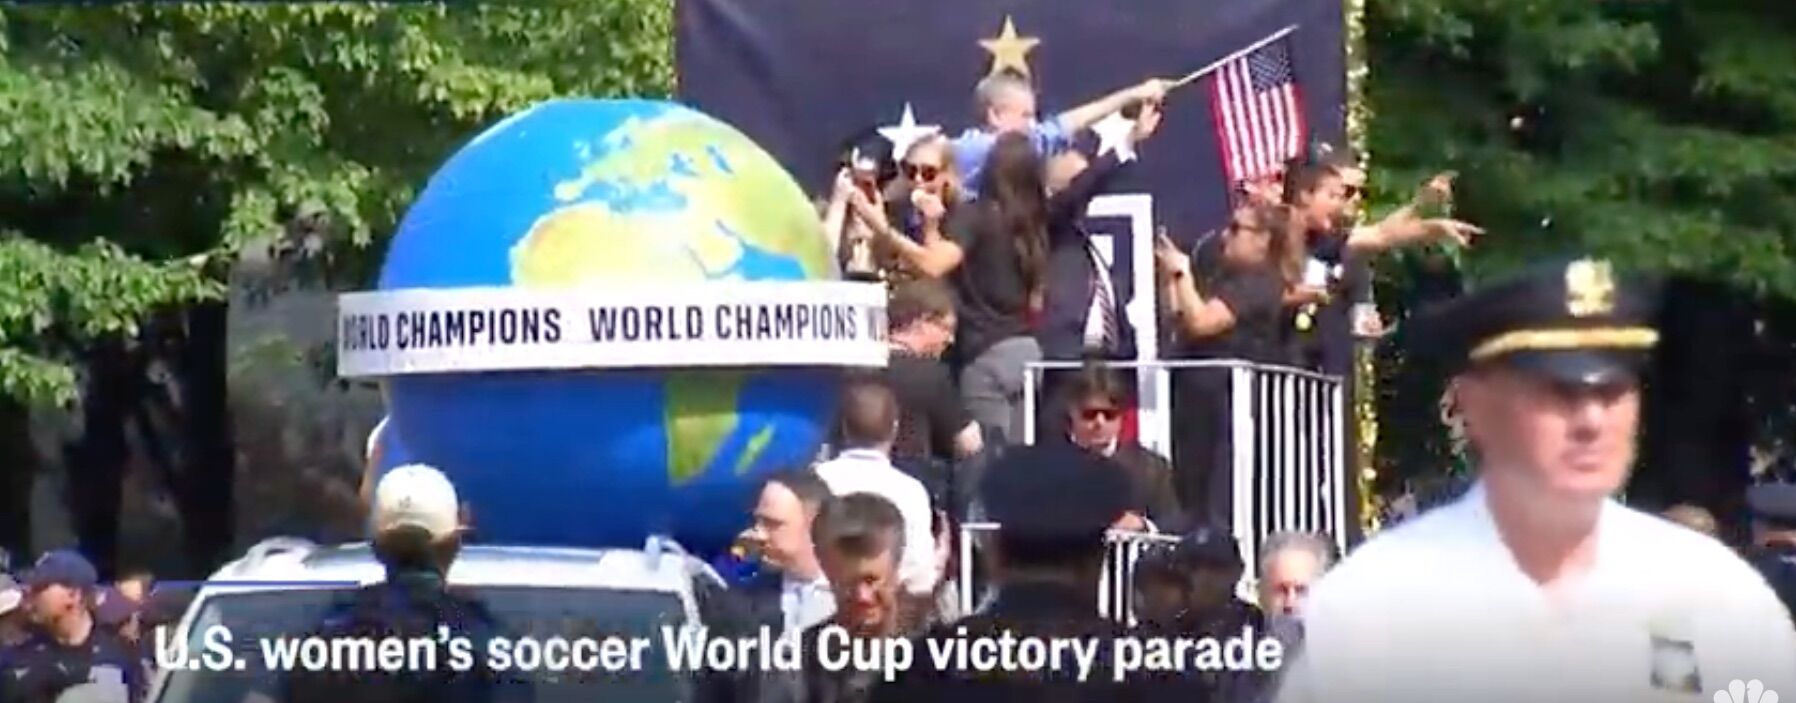 NYC is hosting a ticker-tape parade through the streets of Manhattan for the US women's soccer team's World Cup win.